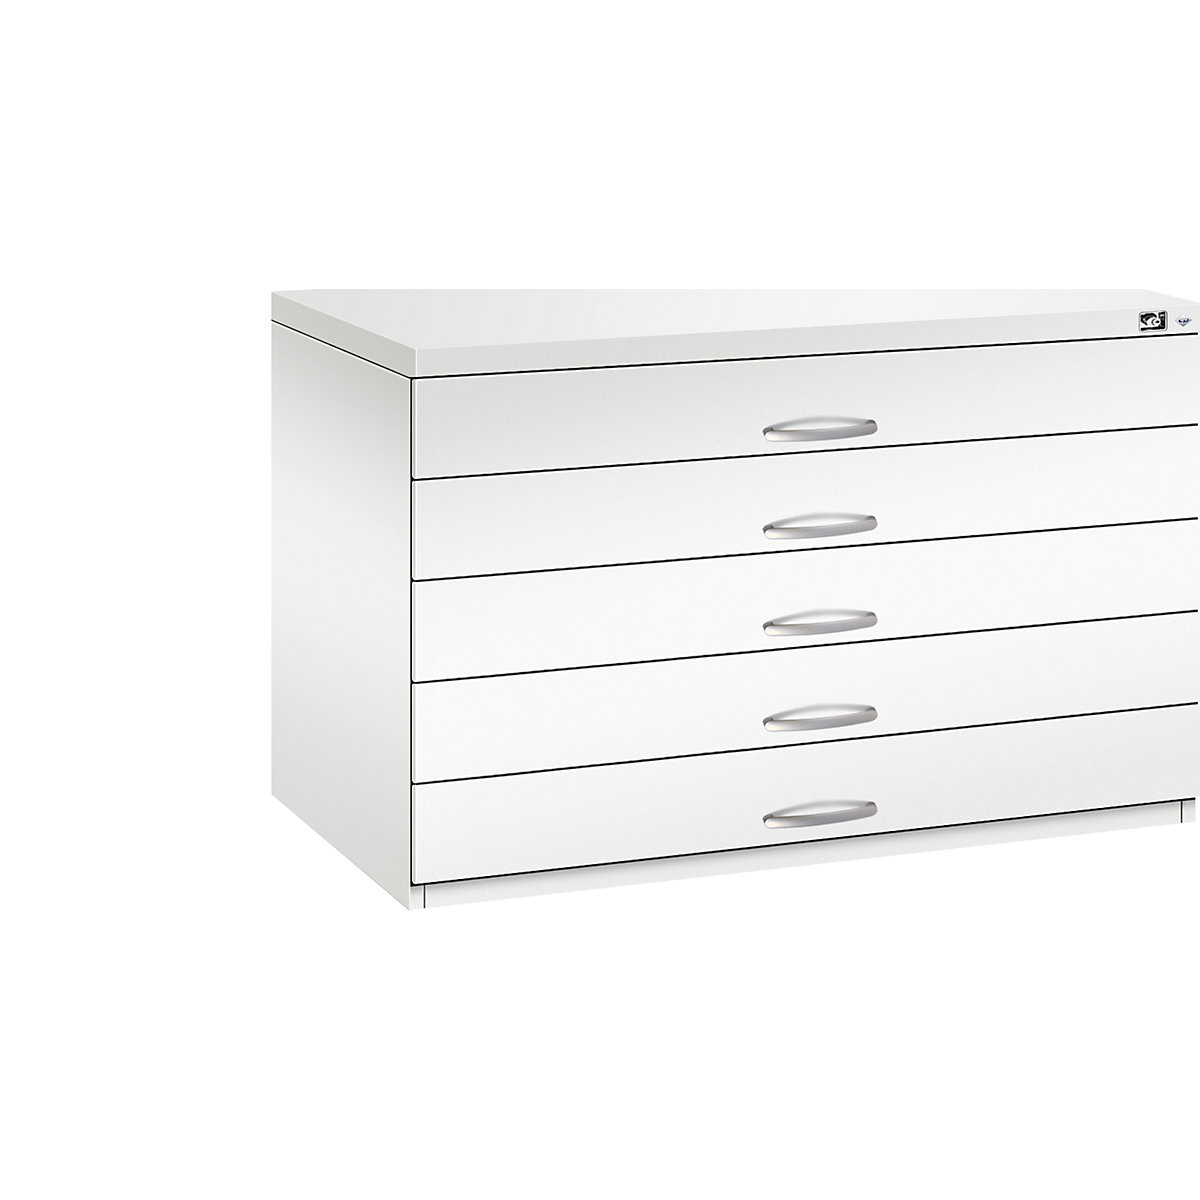 Drawing cabinet – C+P, A1, 5 drawers, height 760 mm, traffic white-22